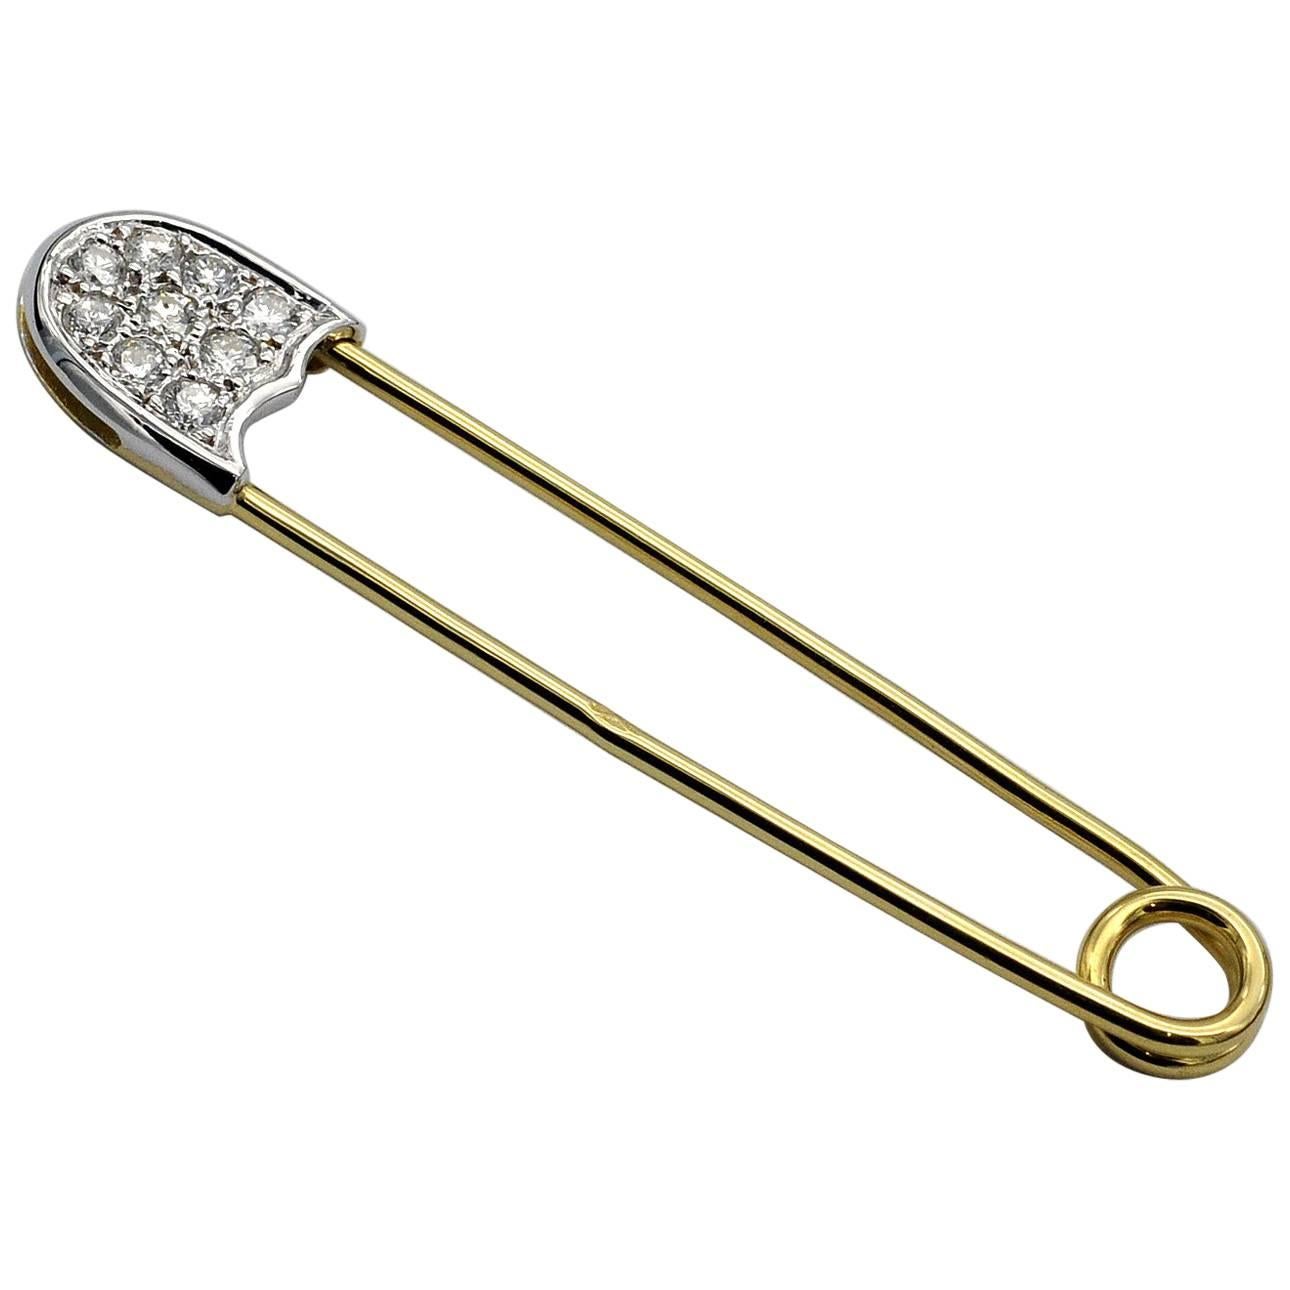  Diamond and Gold Safety Pin Charm Brooch